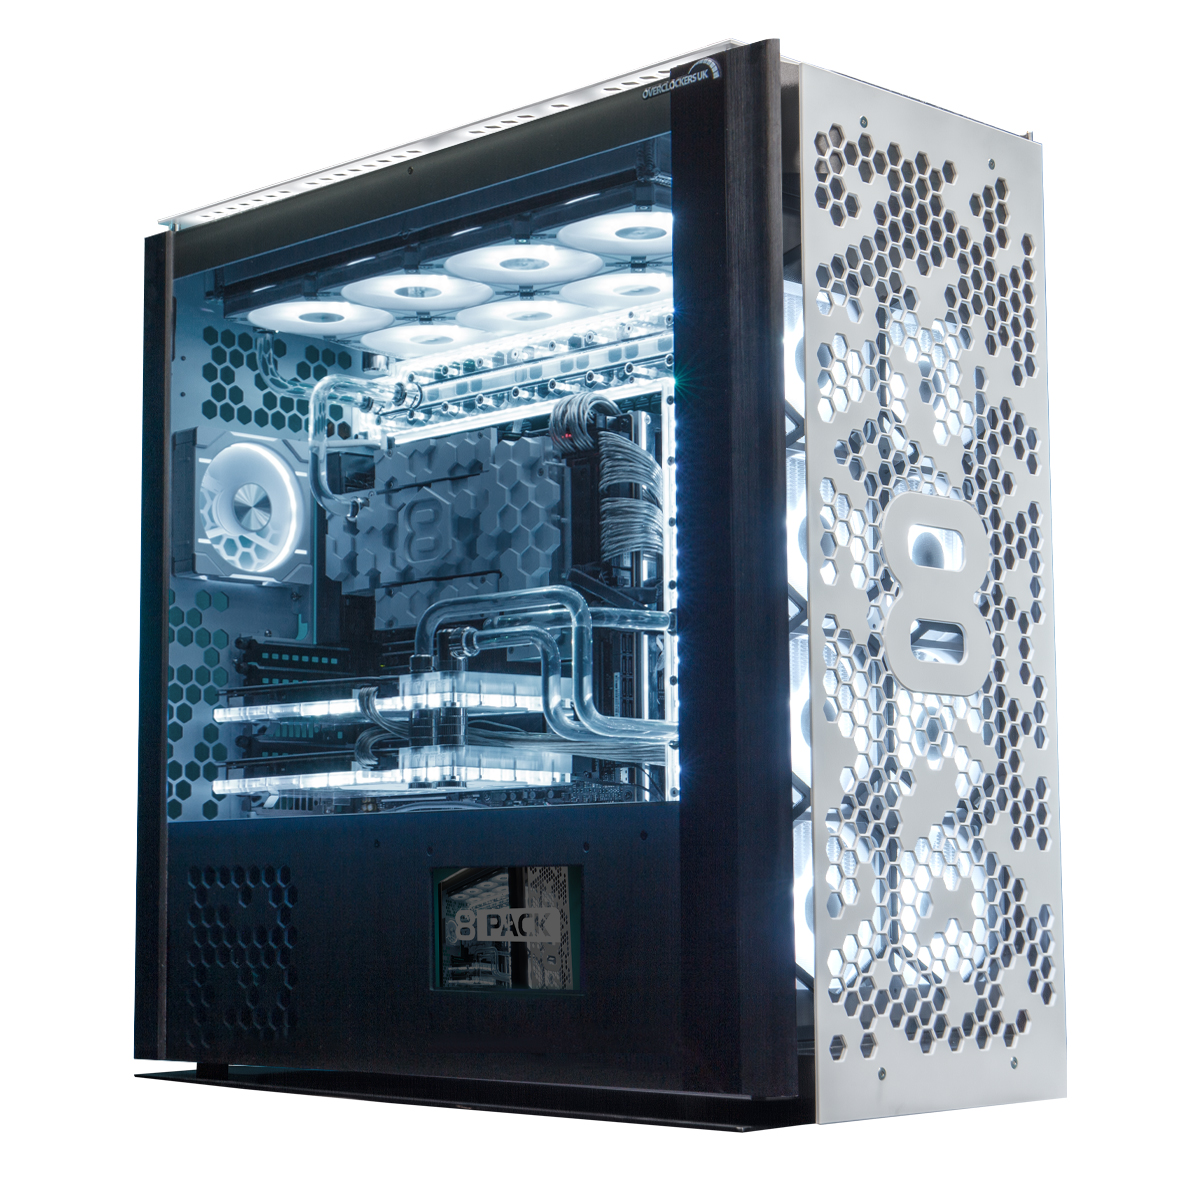 8Pack Domin8 Extreme Overclocked PC